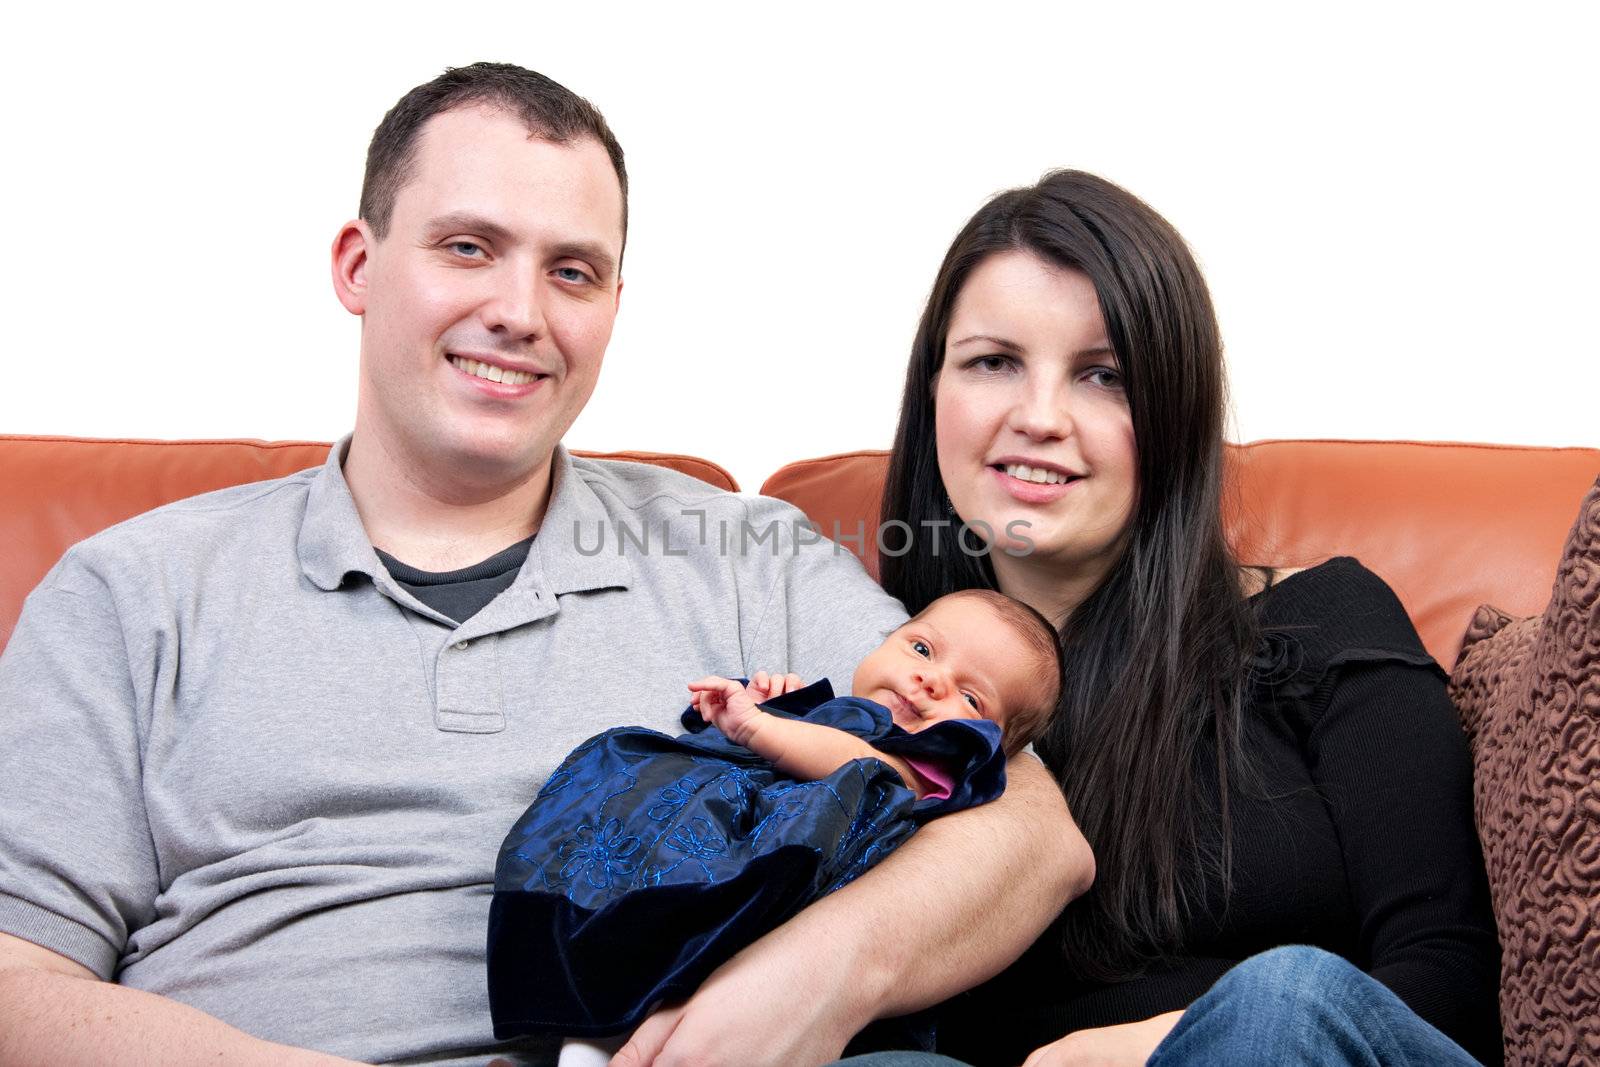 A young happy and healthy family seated on a couch holding their newborn daughter.